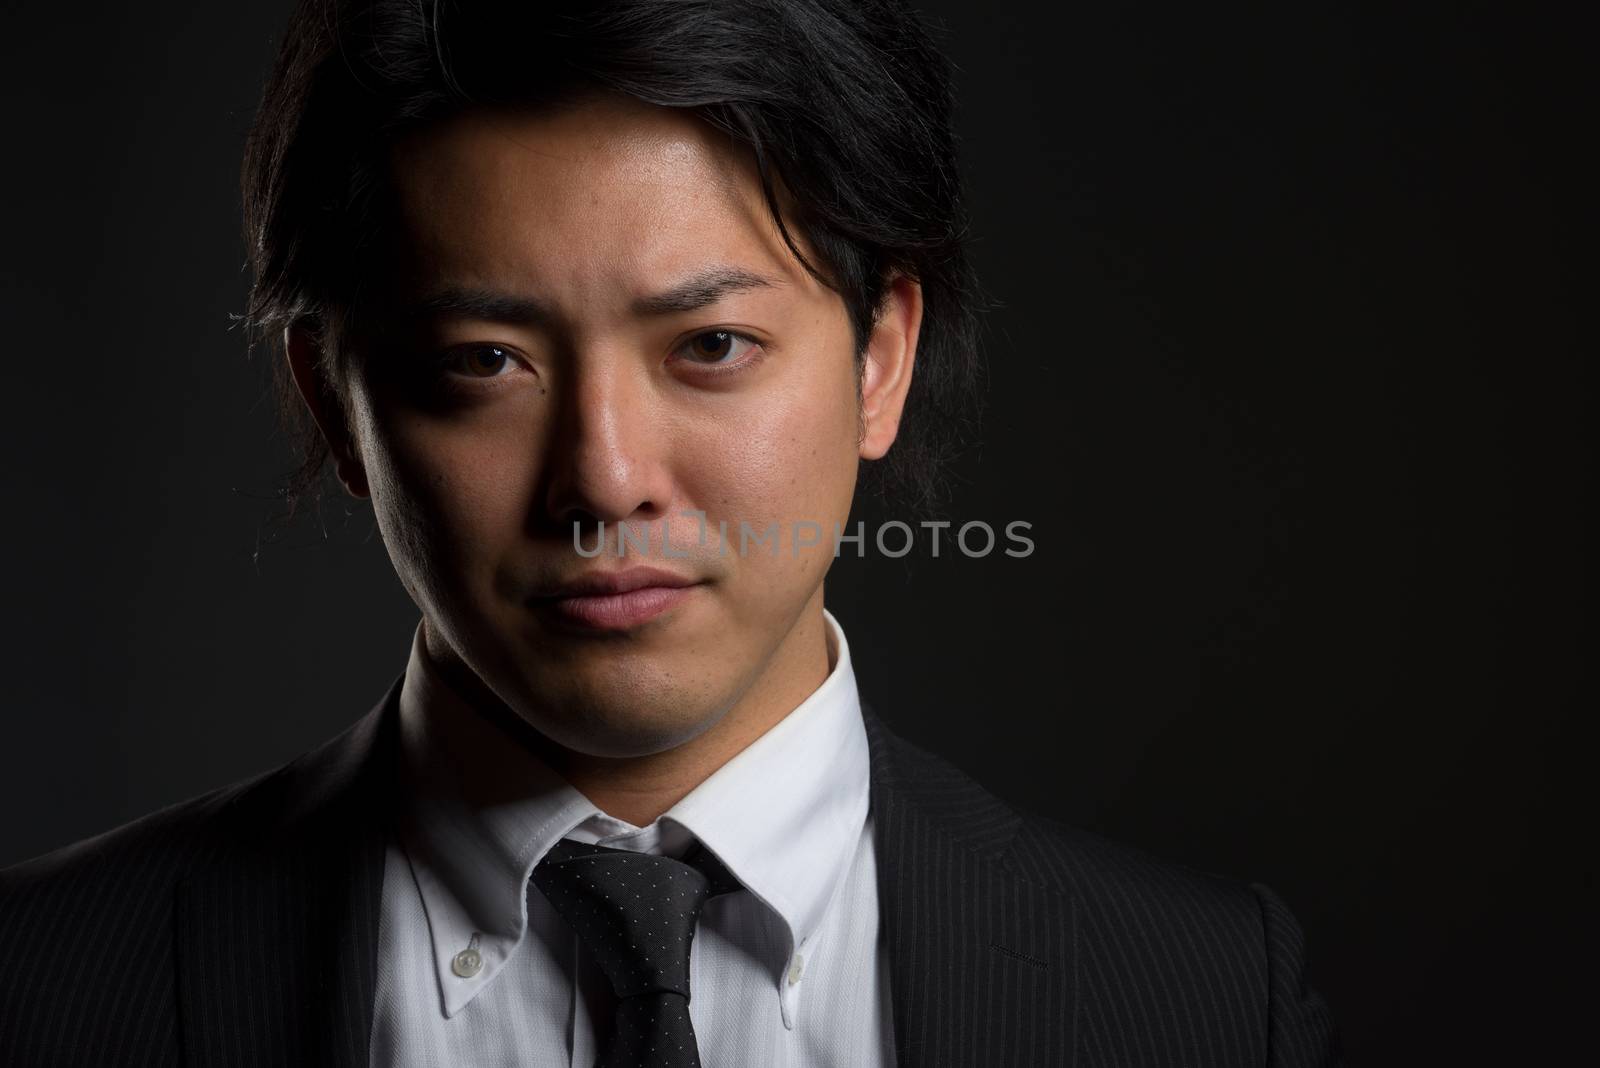 Dark and Smiling Asian Male Portrait by justtscott